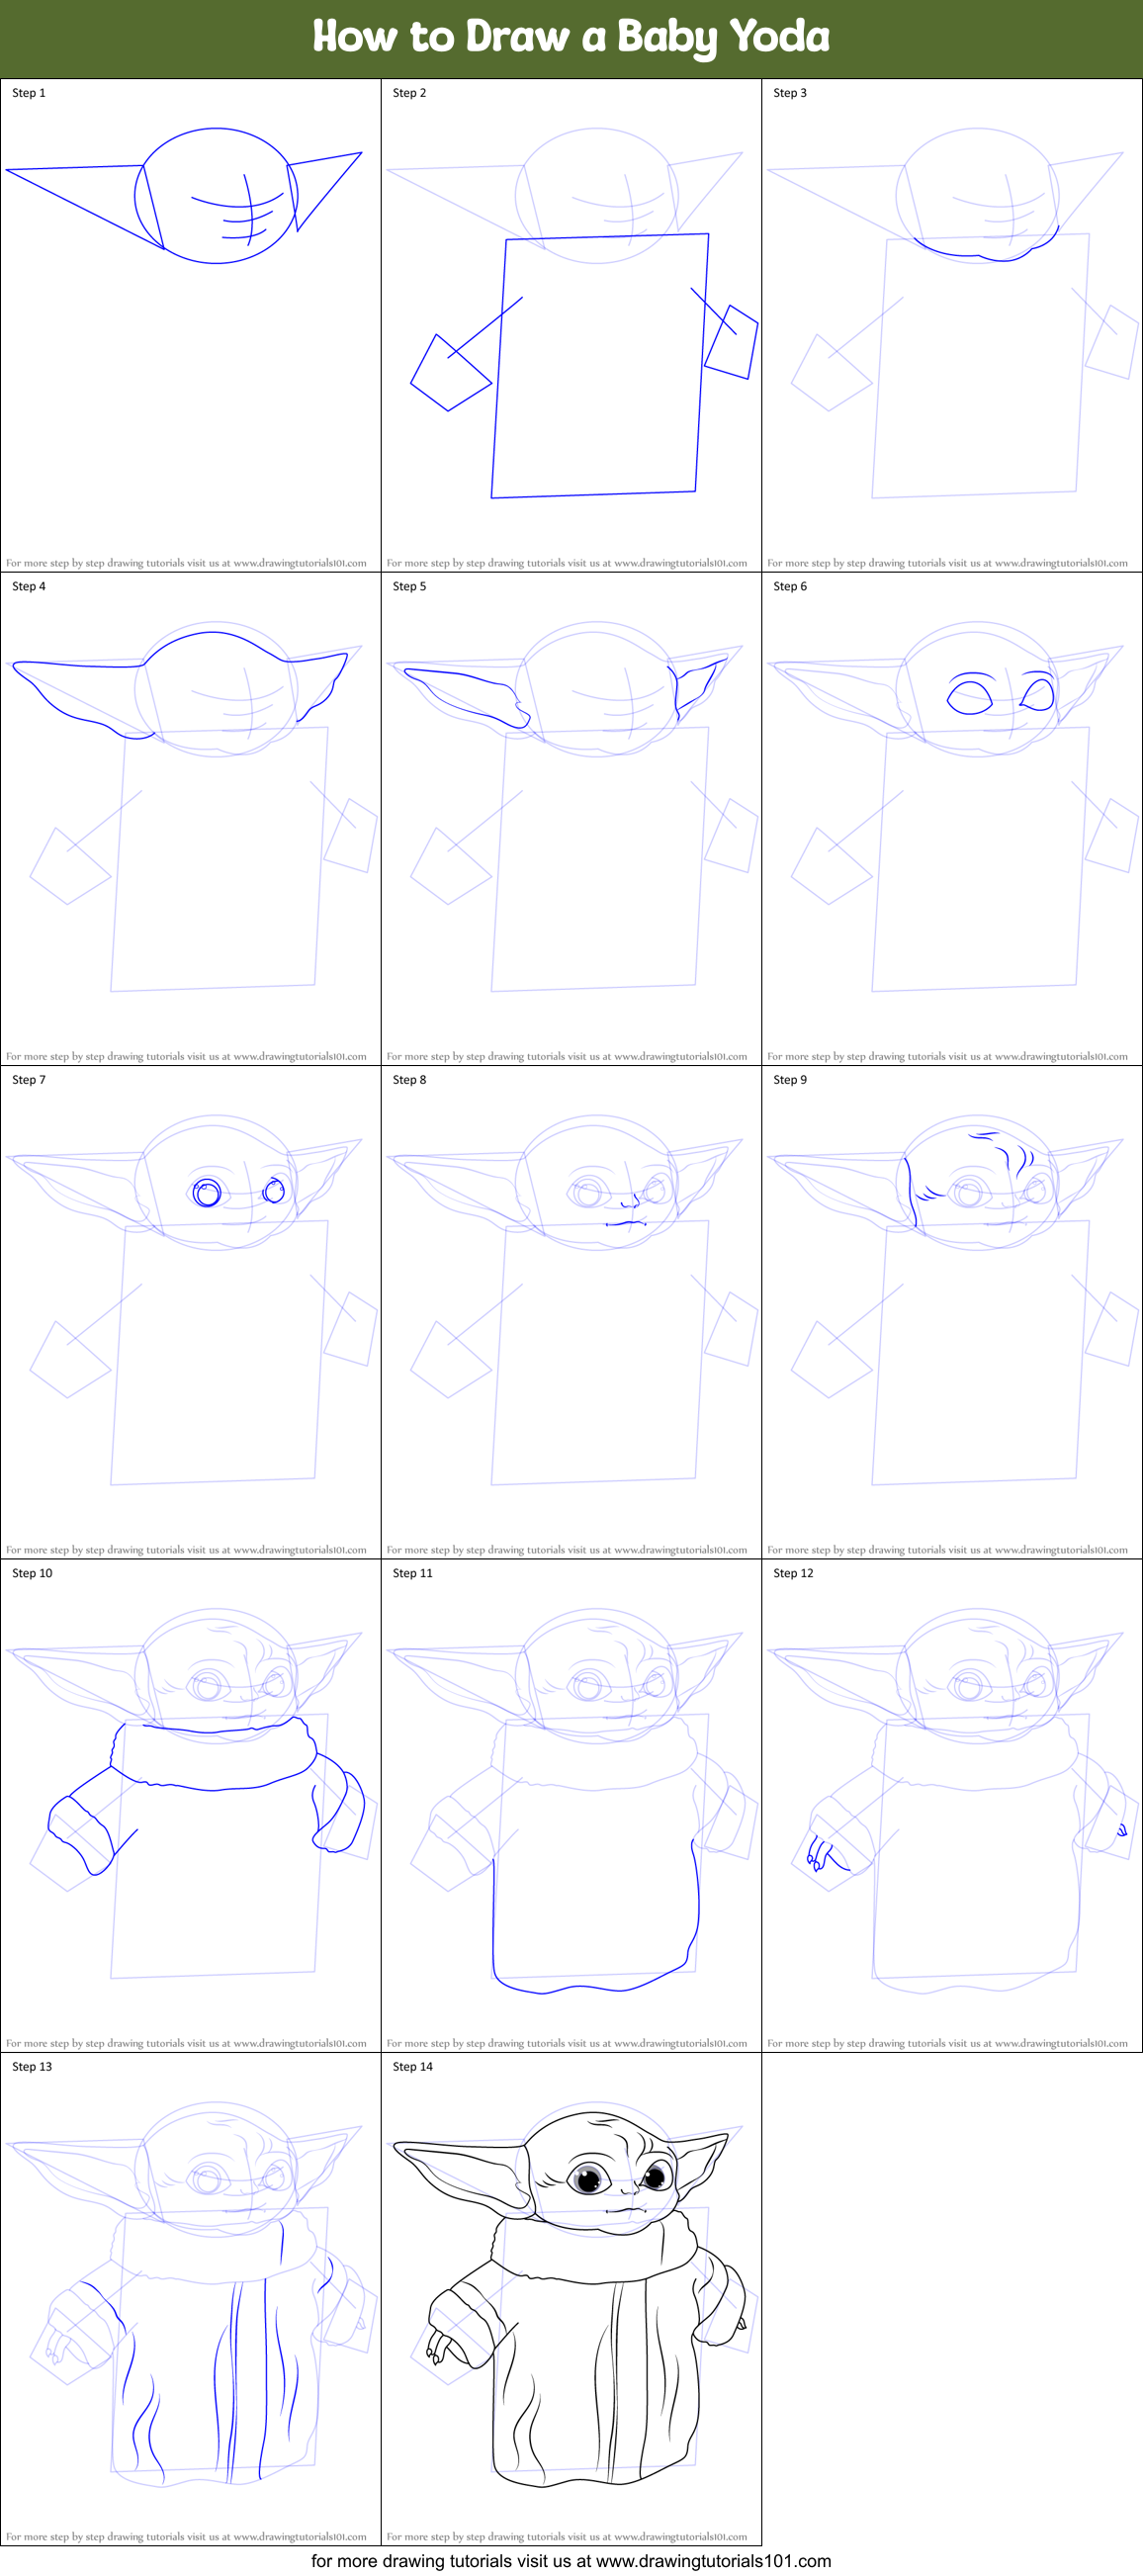 How To Draw A Baby Yoda Printable Step By Step Drawing Sheet Drawingtutorials101 Com